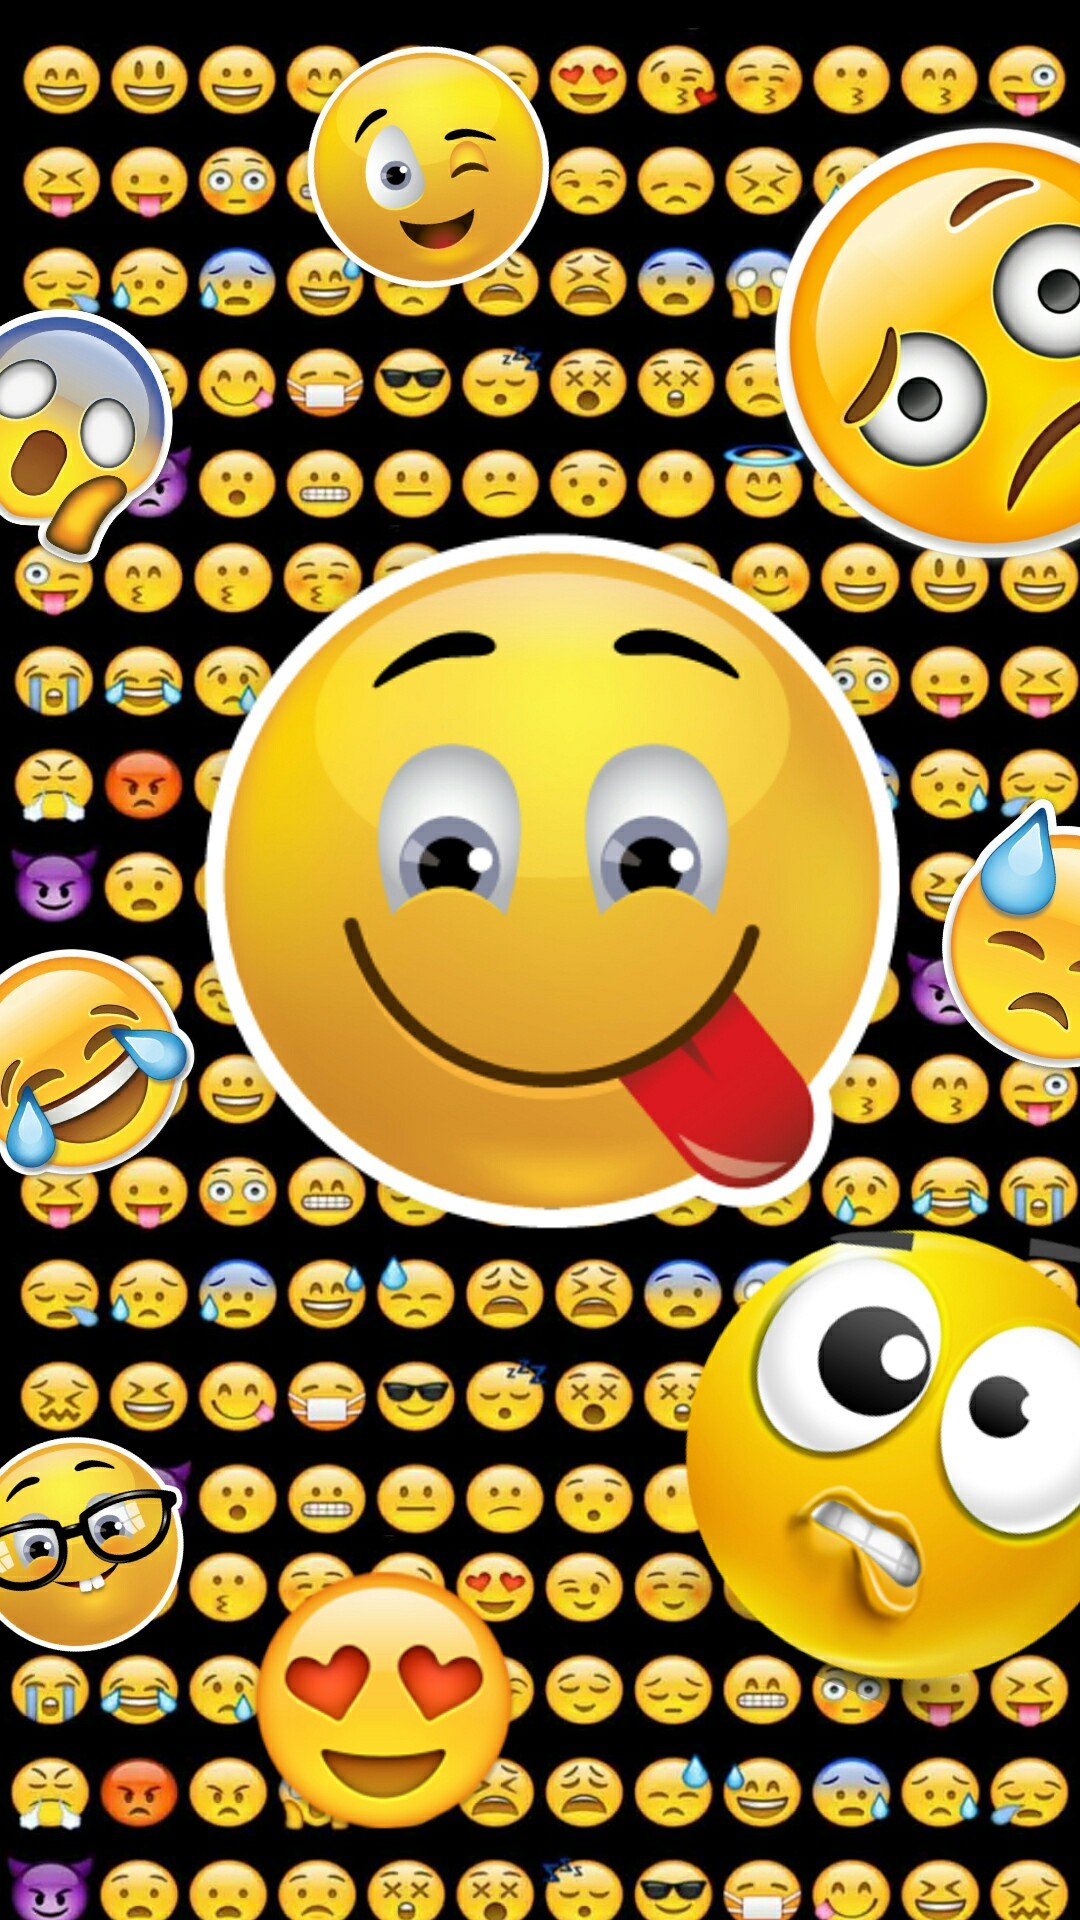 Cute Emoji Wallpapers for iPhone 57 images 